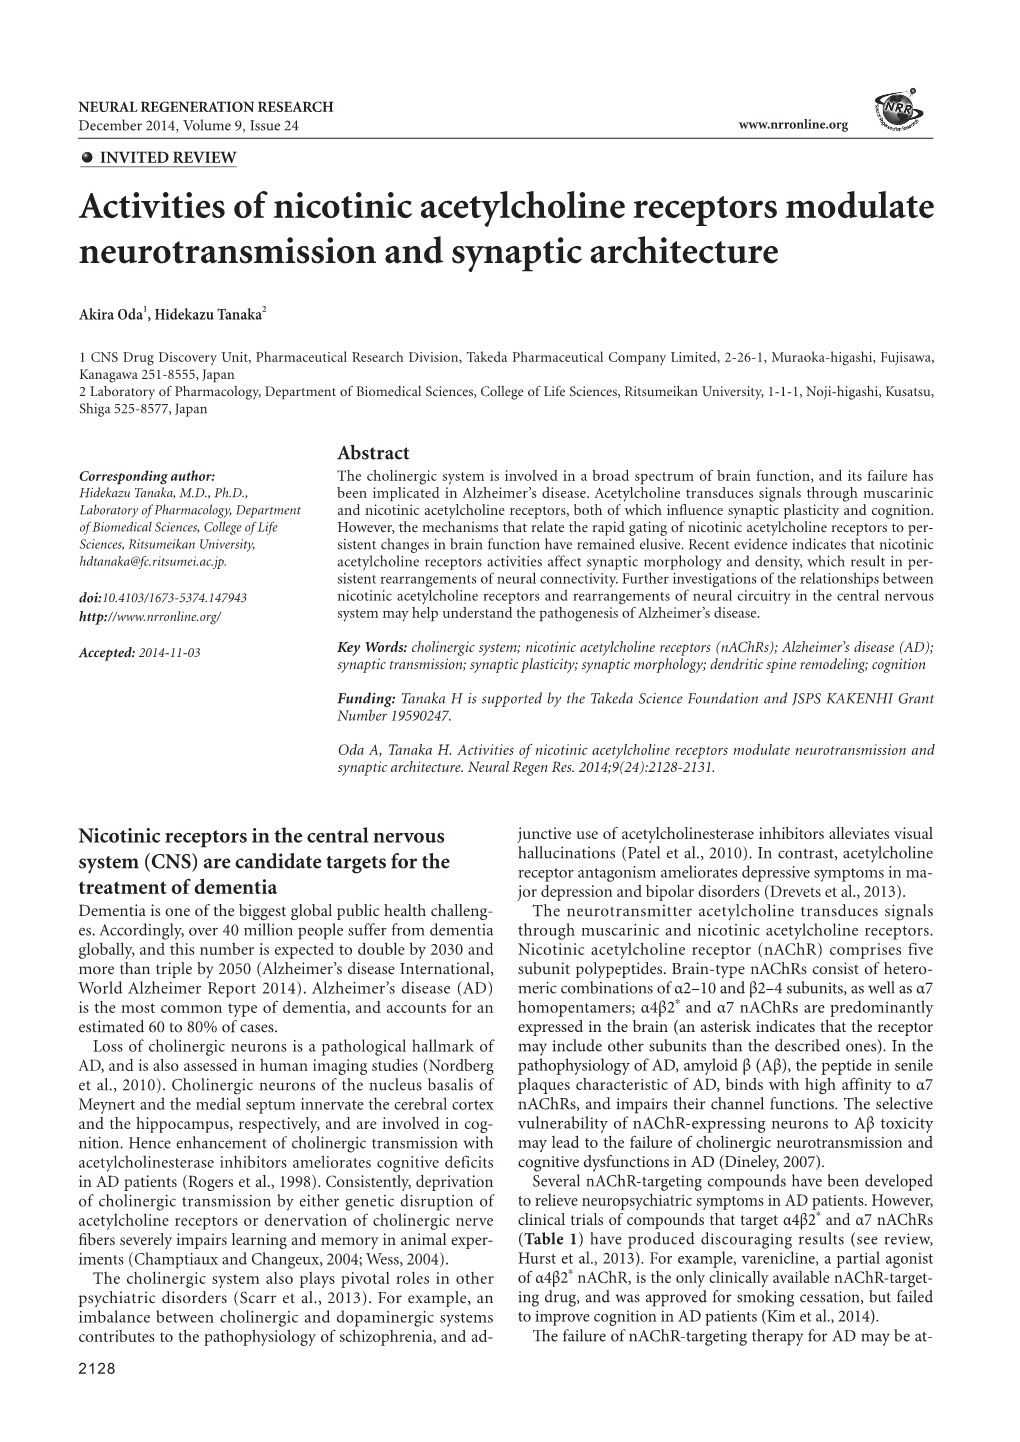 Activities of Nicotinic Acetylcholine Receptors Modulate Neurotransmission and Synaptic Architecture